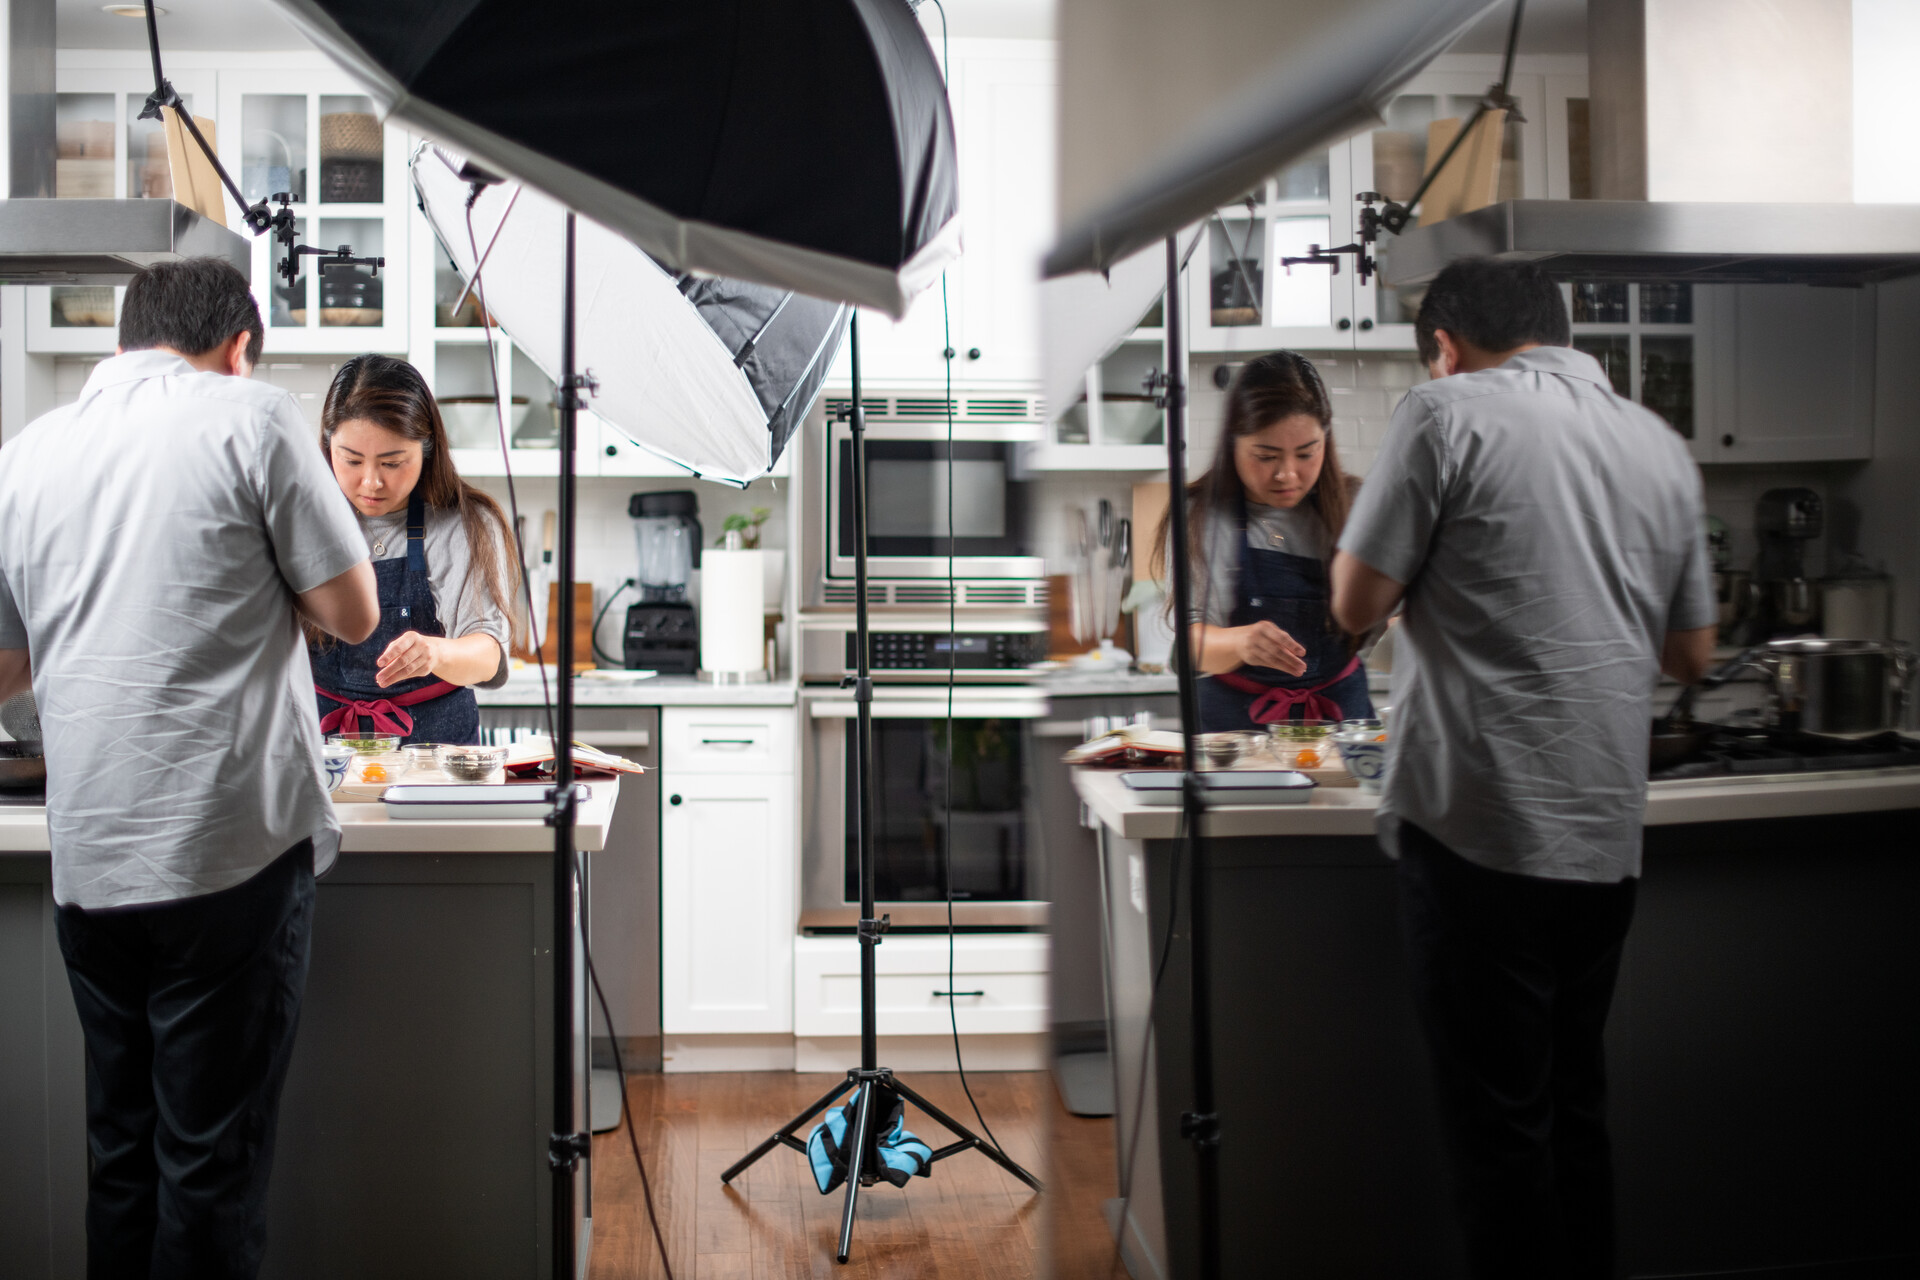 A woman preps food in the kitchen while a man photographs what she's doing; there's a double exposure of this image.